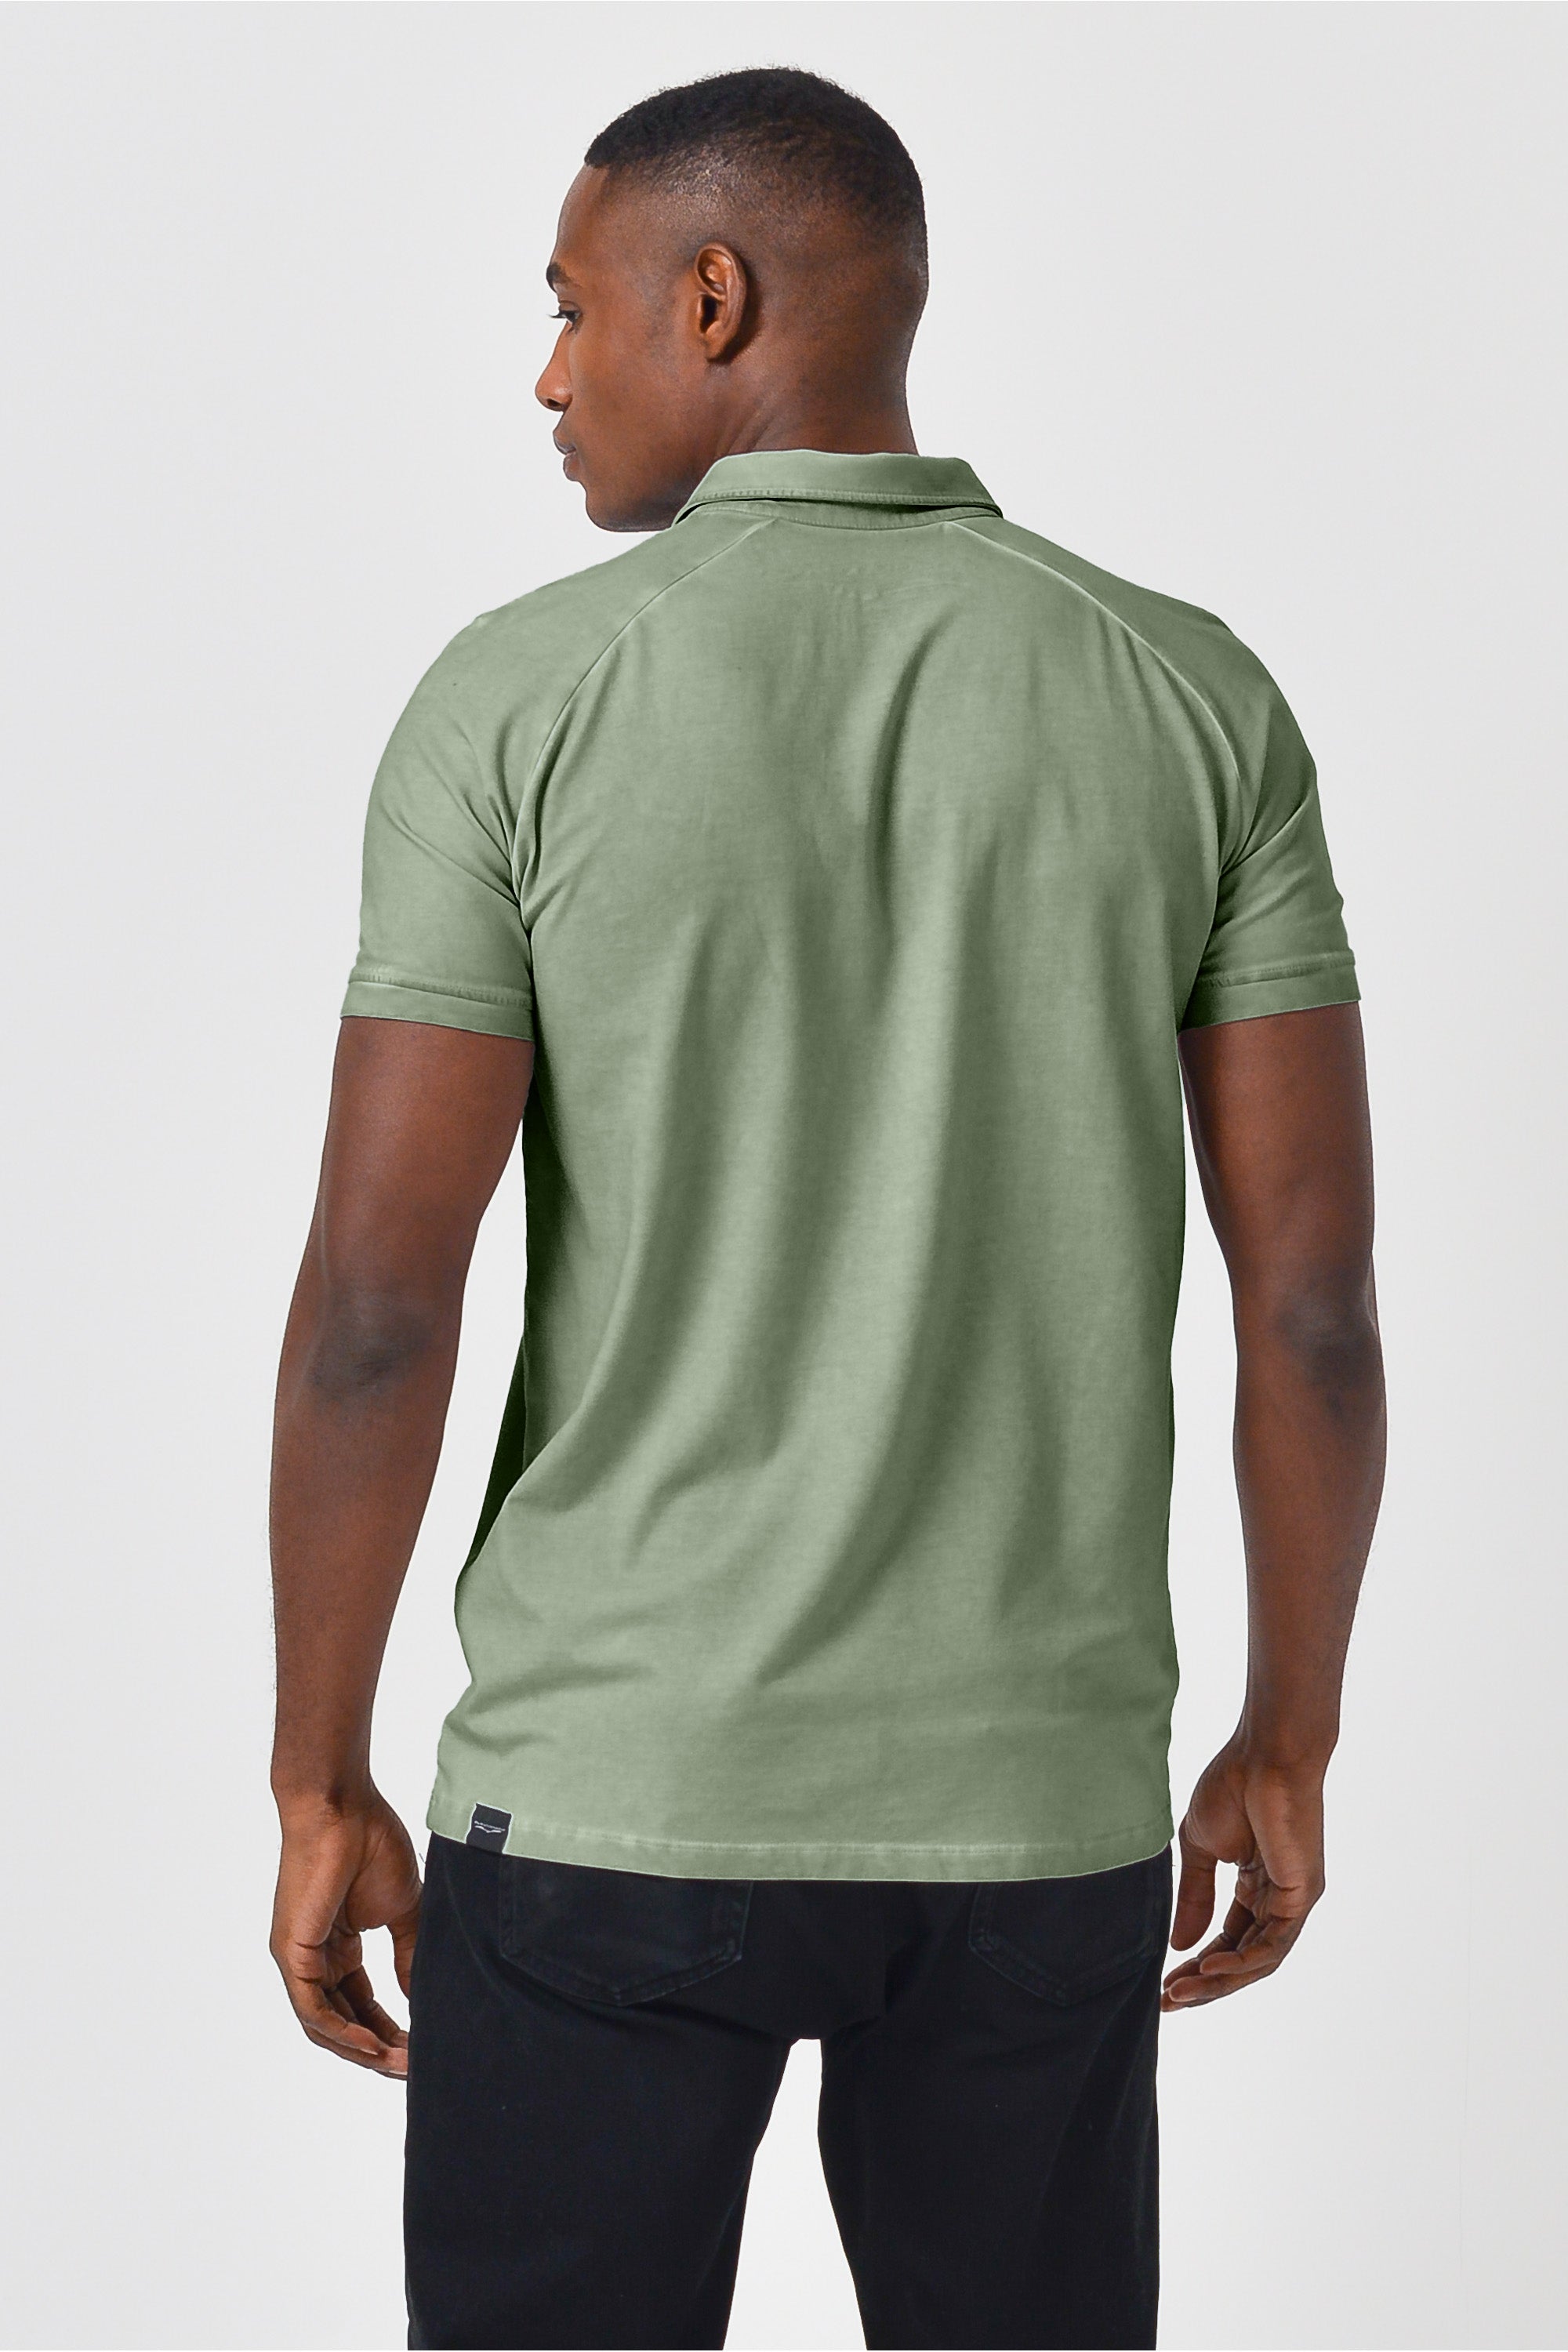 Performance Polo in Palm